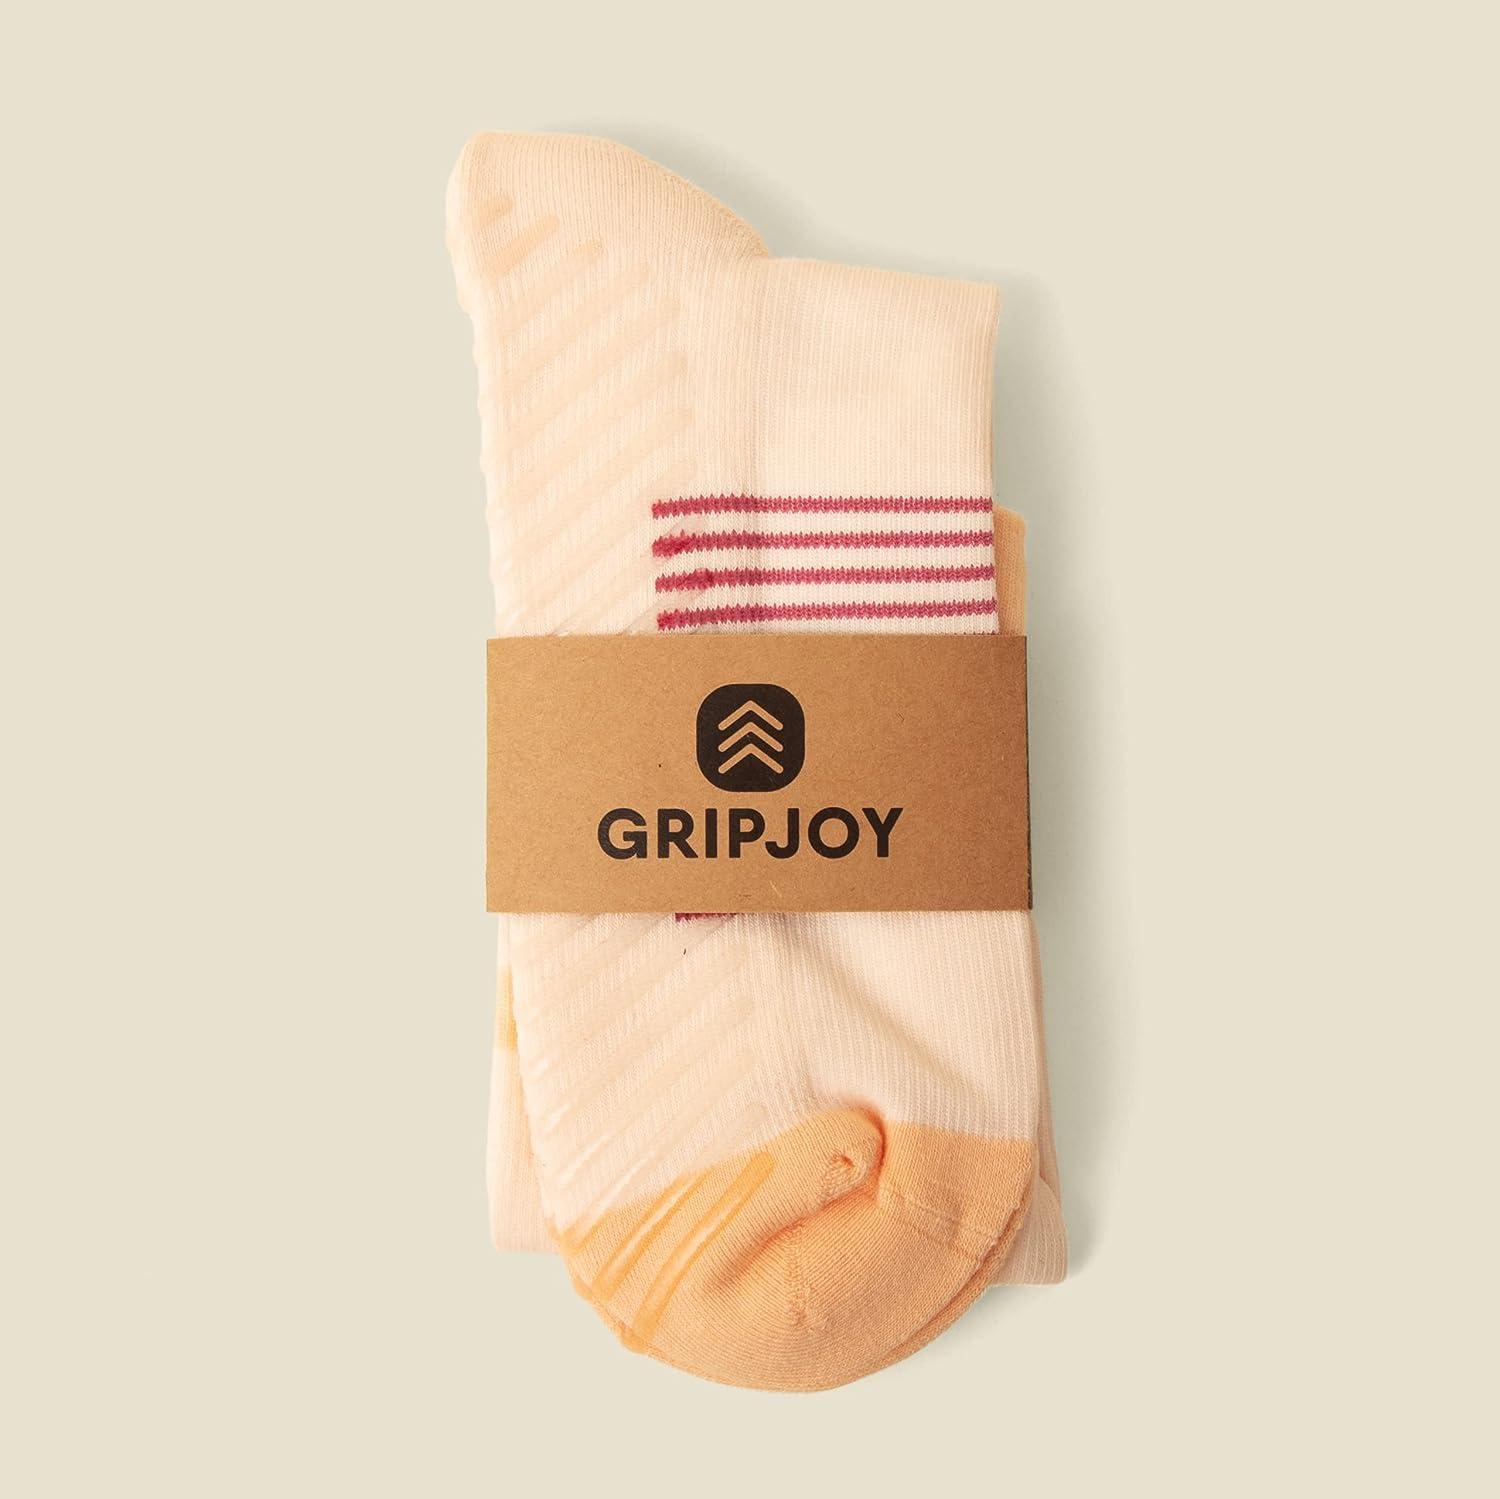 New Gripjoy Men's Compression Socks with Grips